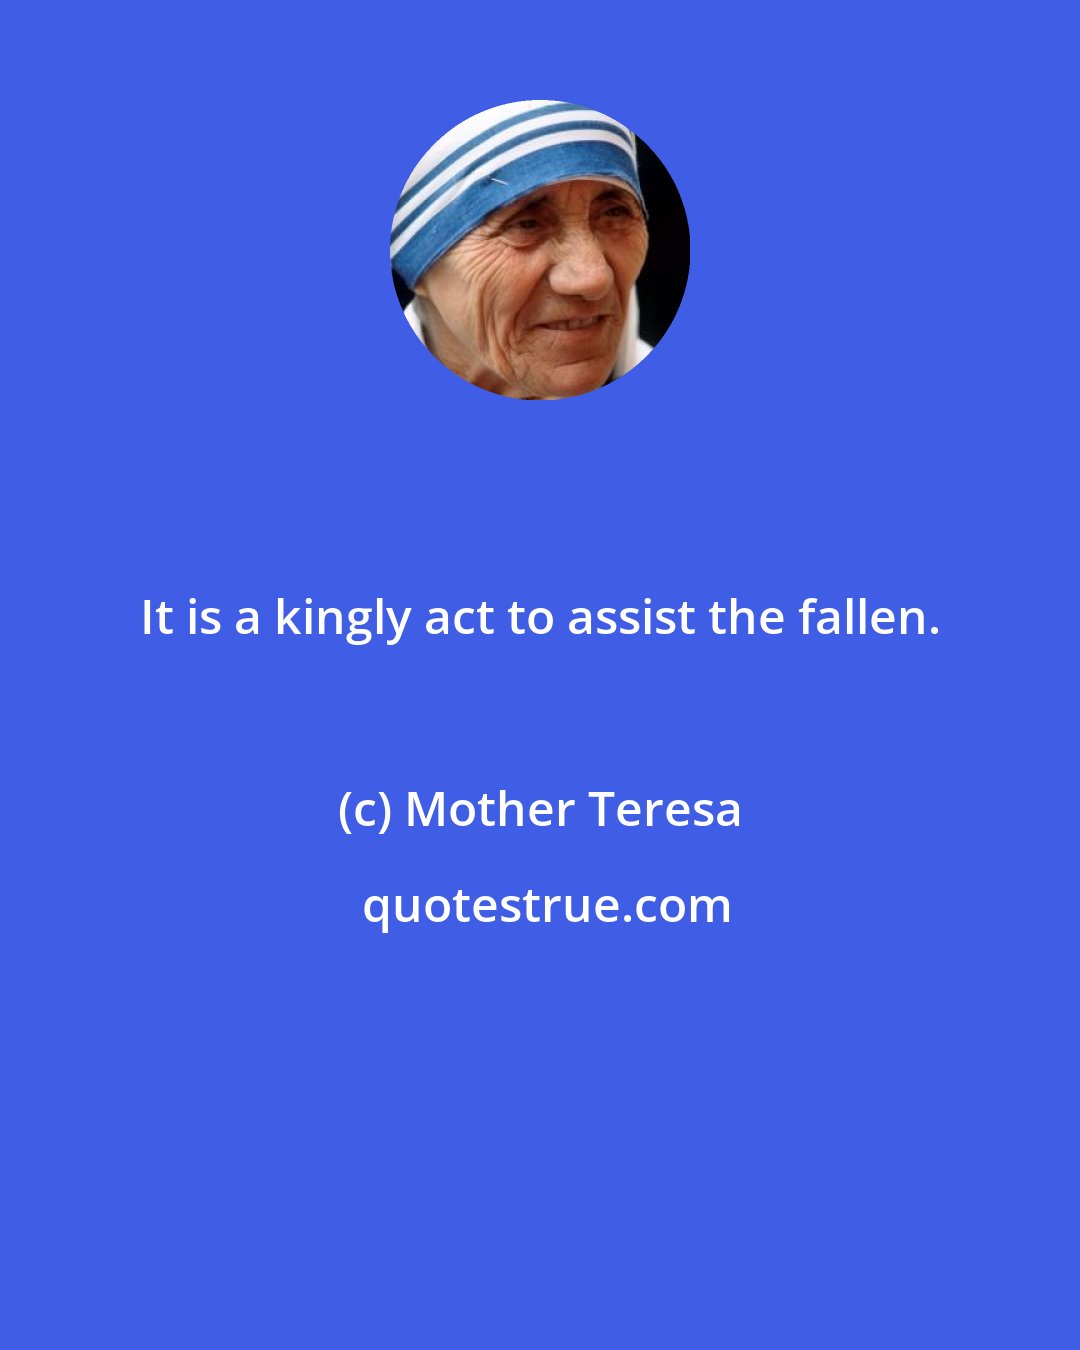 Mother Teresa: It is a kingly act to assist the fallen.